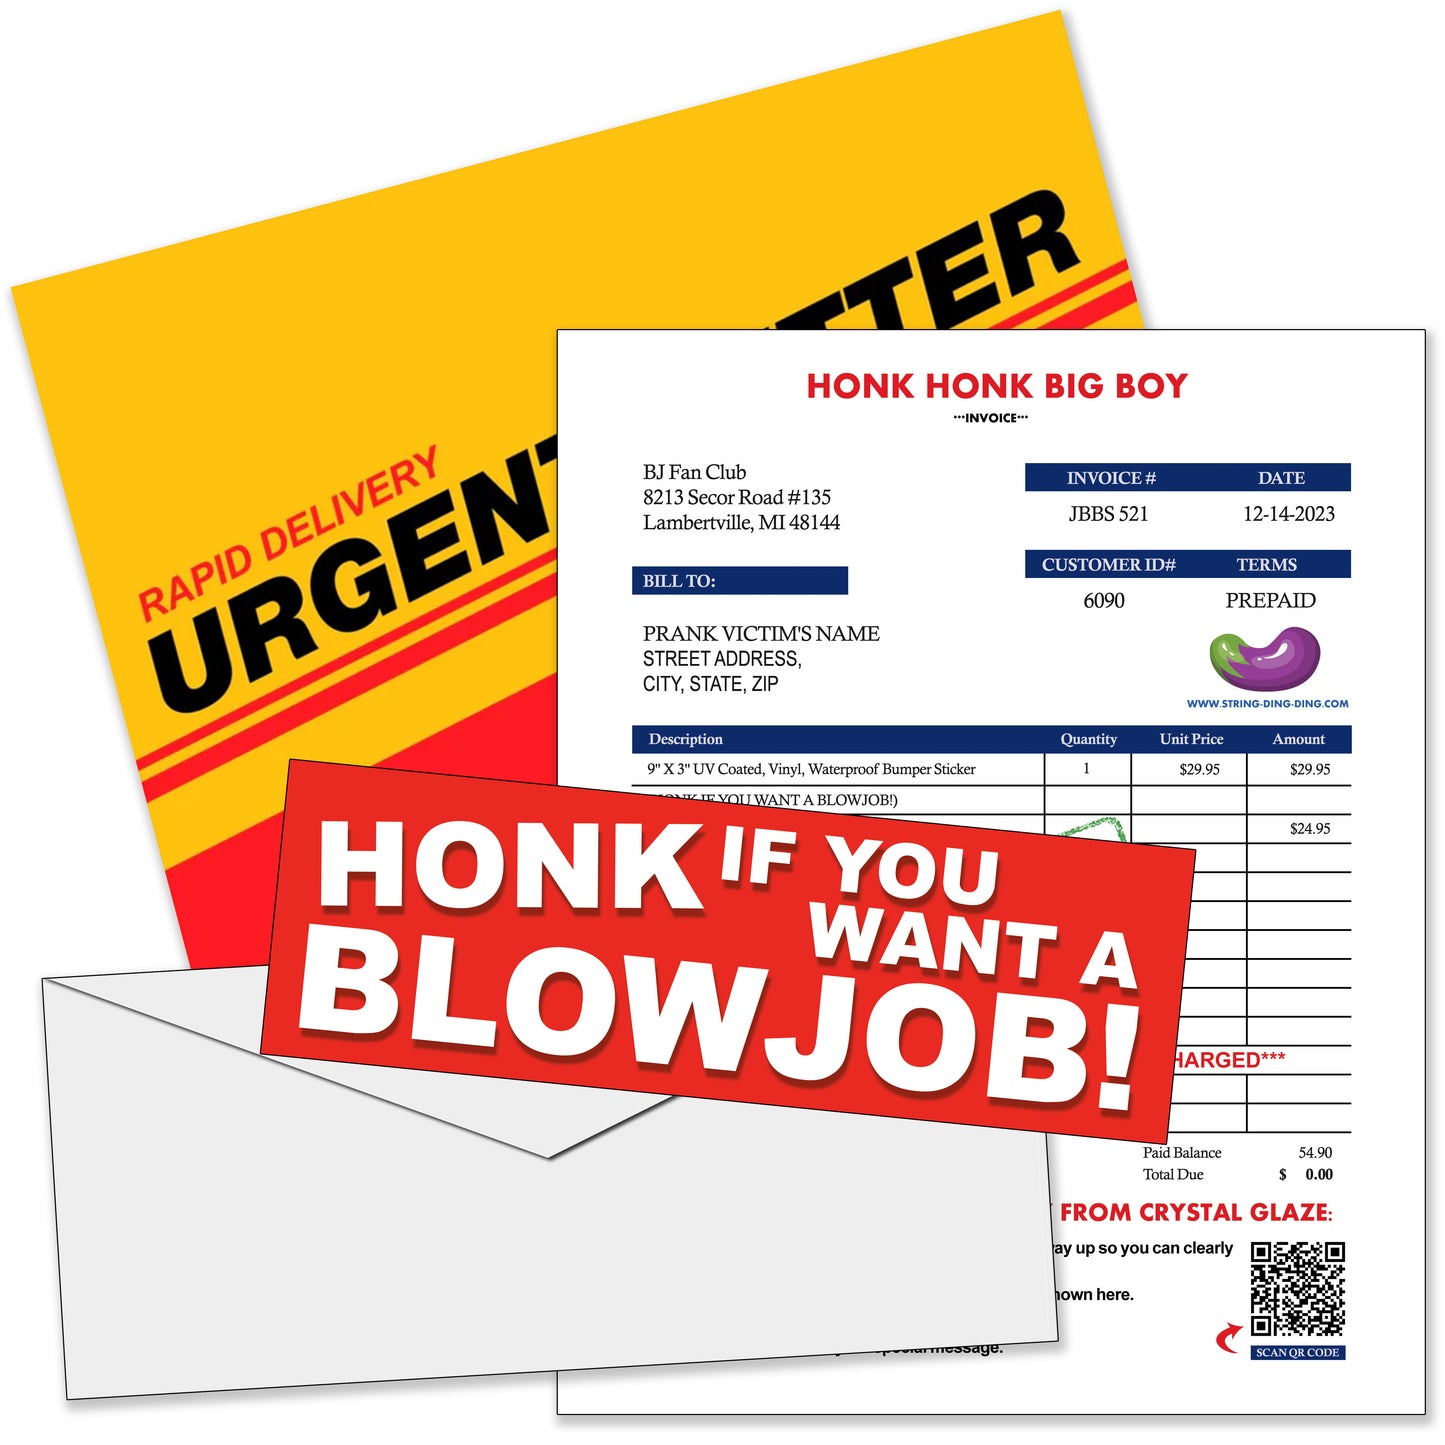 Honk if you want a Blowjob Prank Mail